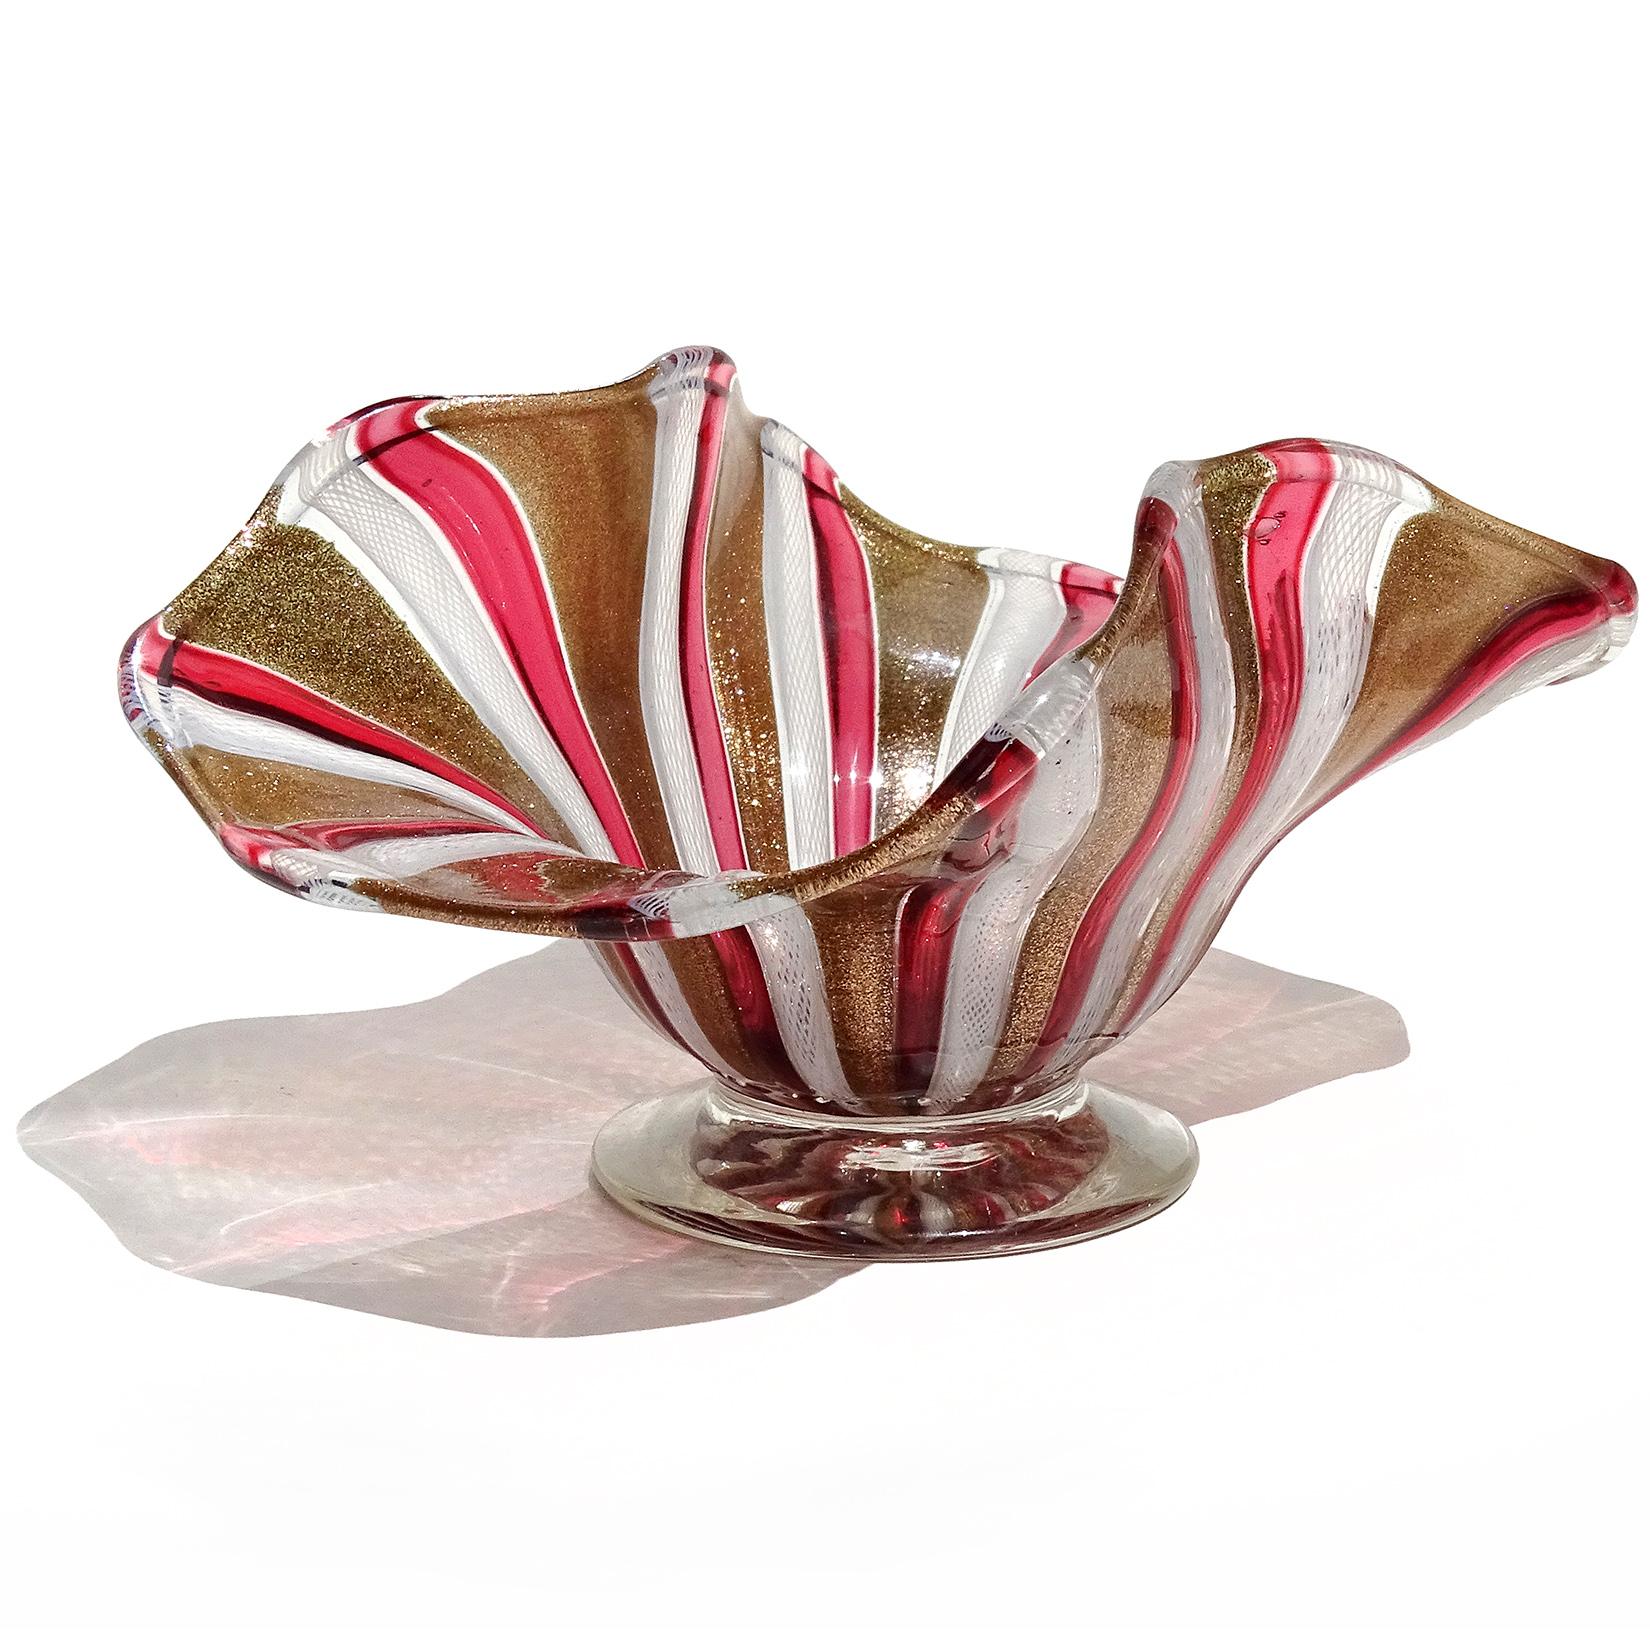 Murano Glittery Copper Aventurine Red White Ribbons Italian Art Glass Bowl Dish In Good Condition For Sale In Kissimmee, FL